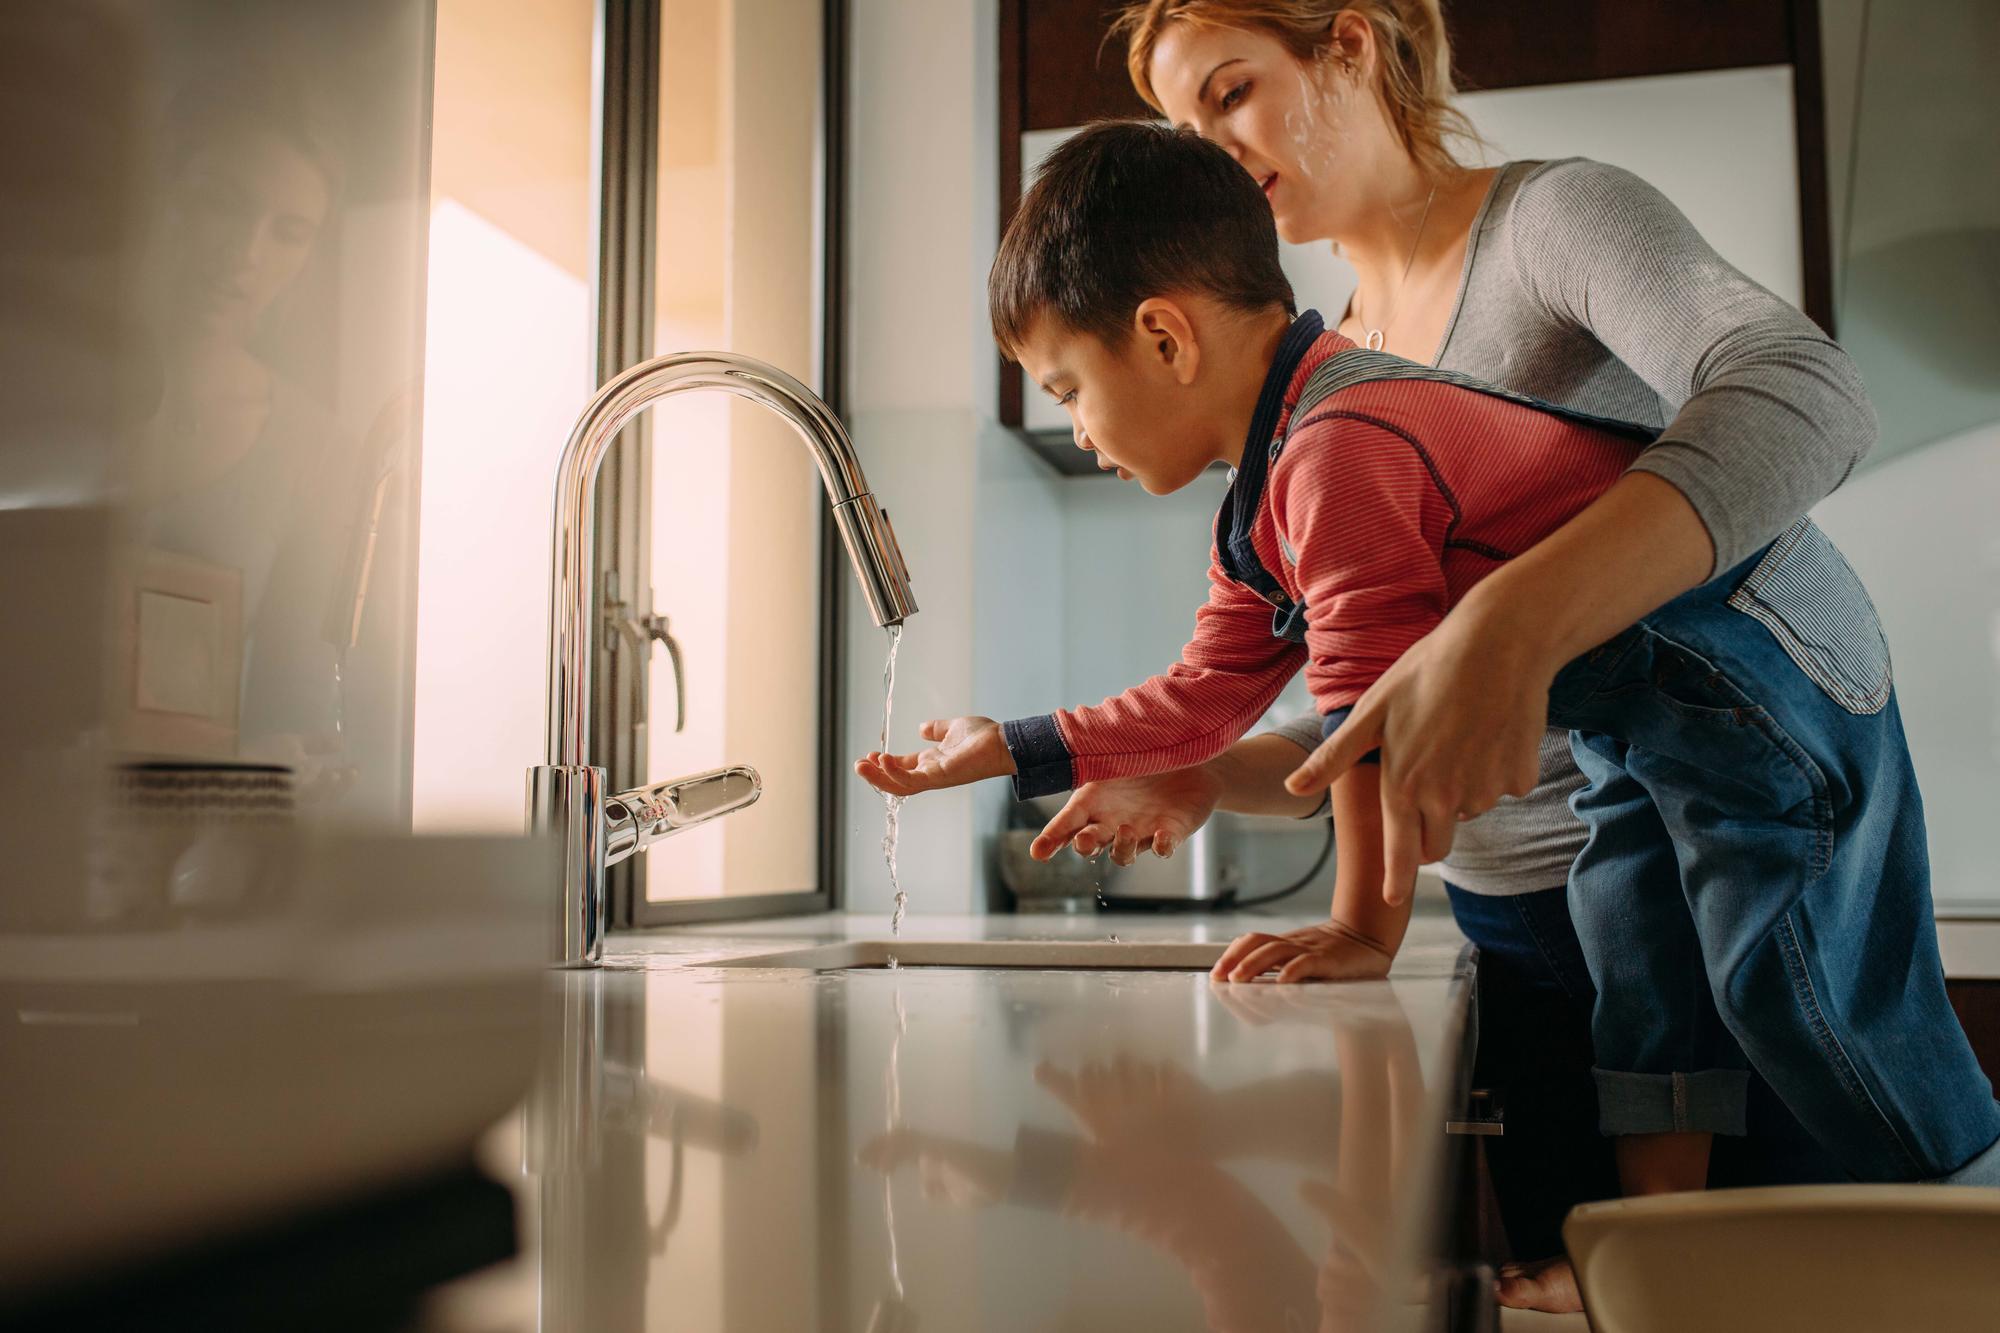 woman helps young boy wash his hands in sink